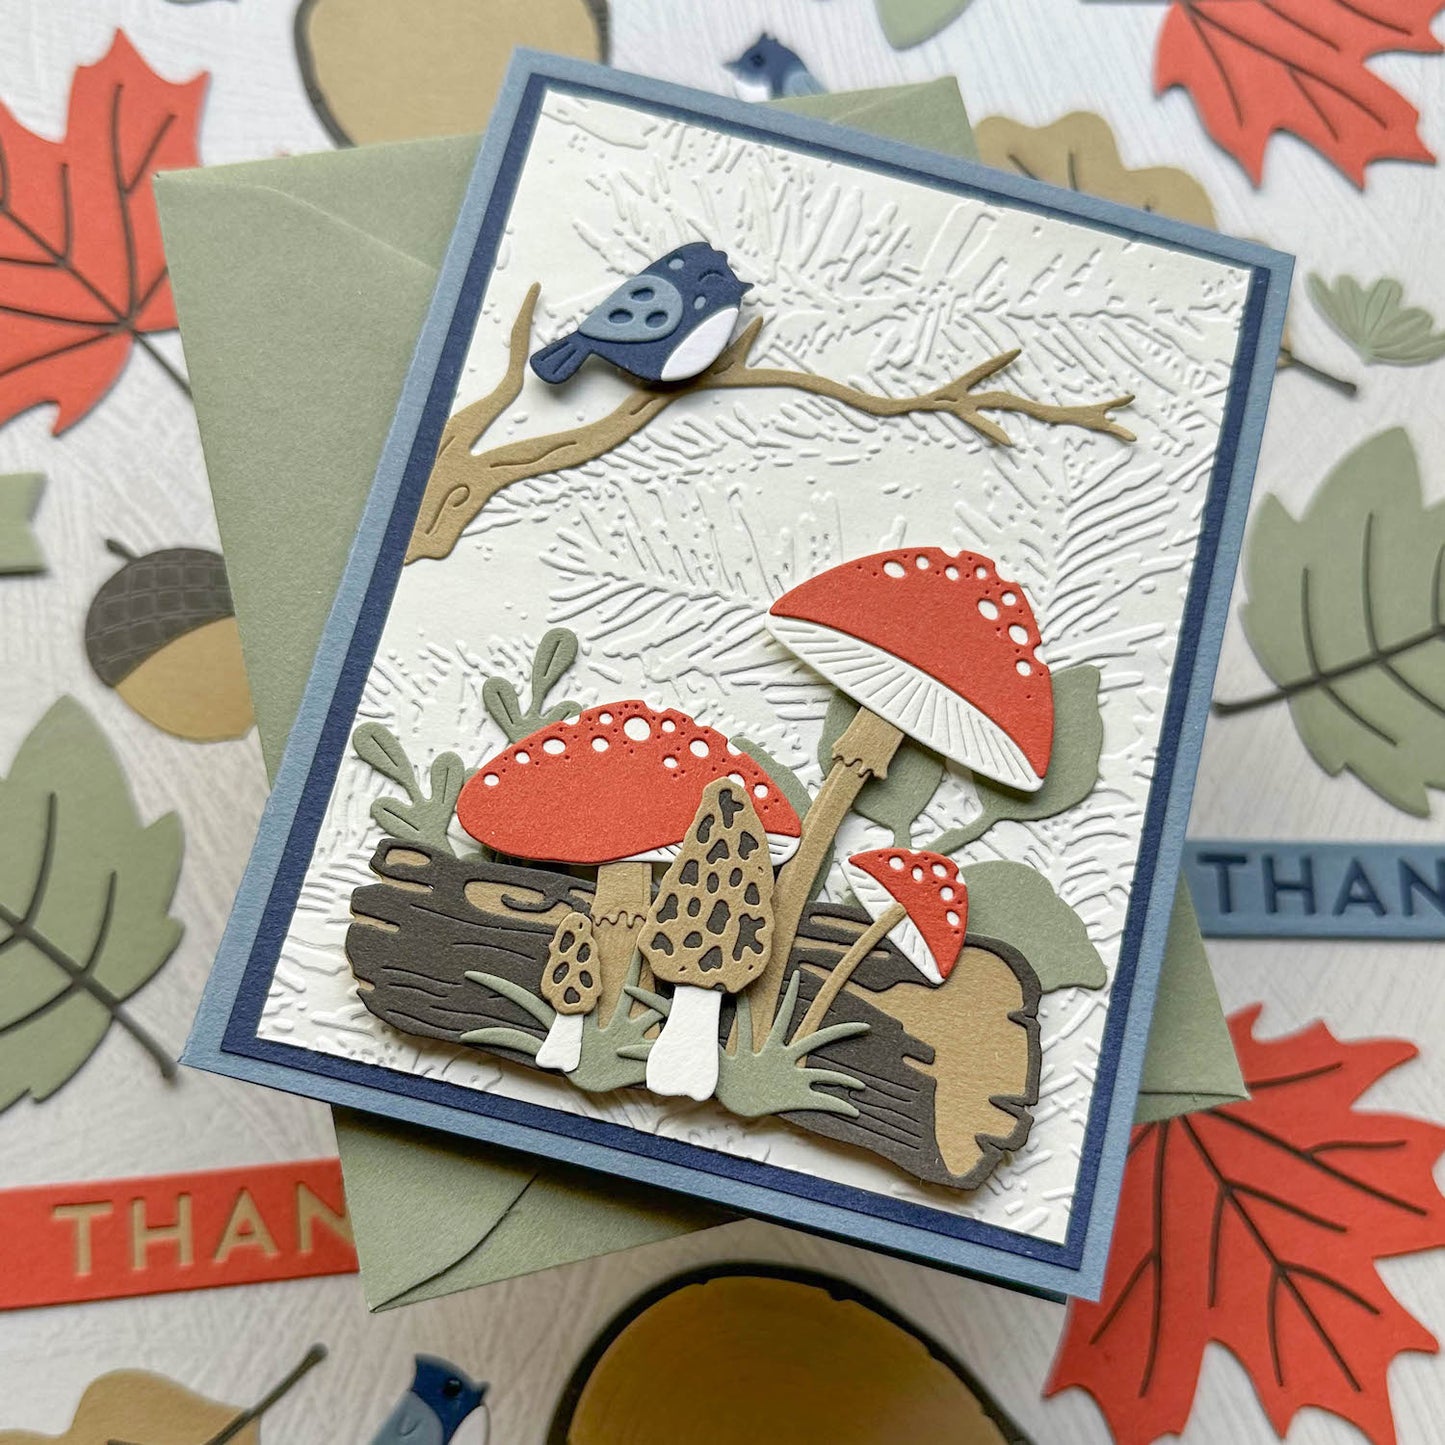 Materica Cardstock Nature Themed Greeting Card